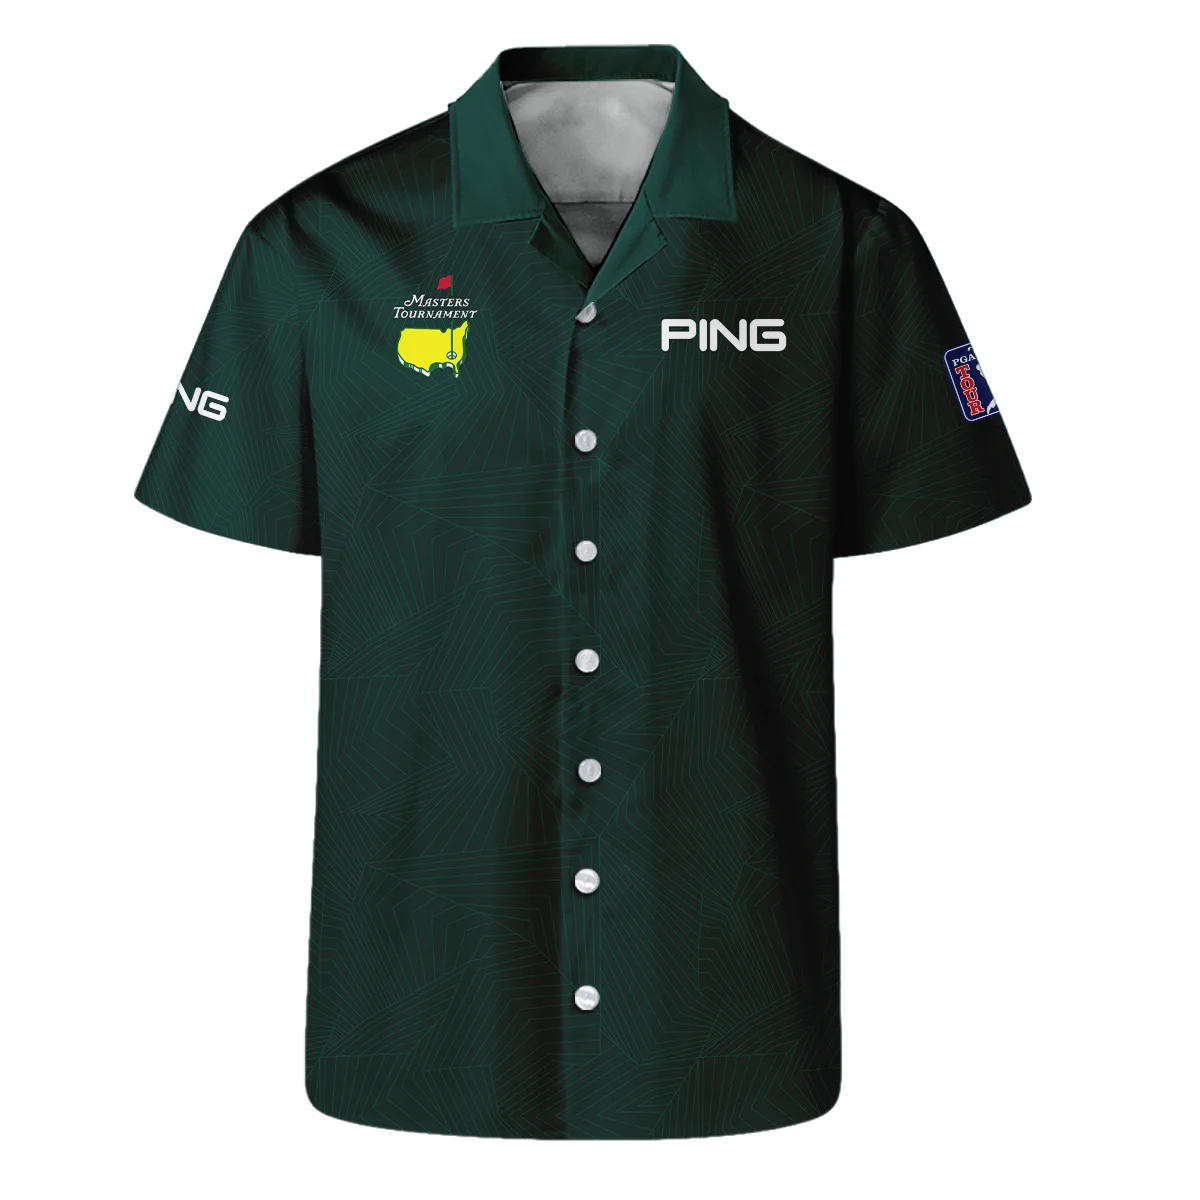 Masters Tournament Ping Pattern Sport Jersey Dark Green Vneck Long Polo Shirt Style Classic Long Polo Shirt For Men